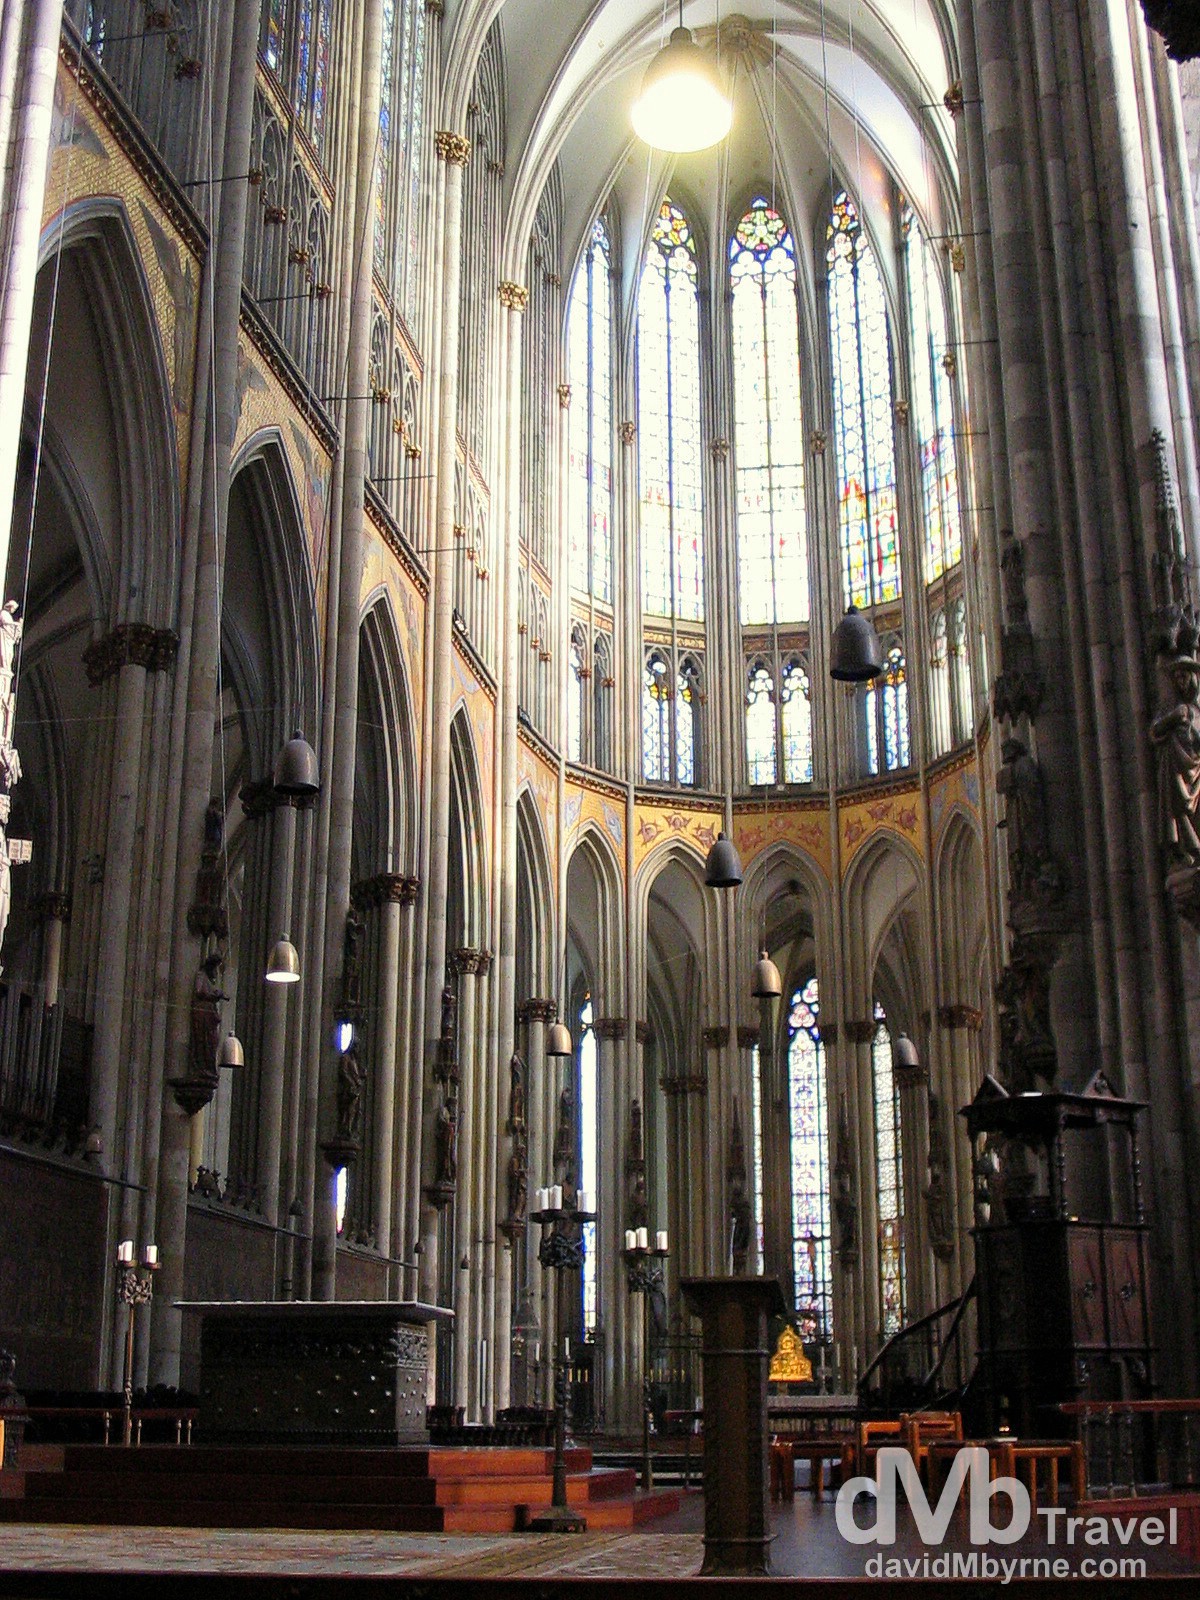 The interior of Cologne Cathedral (Köln Dom), Cologne, Germany. February 16th 2005. 